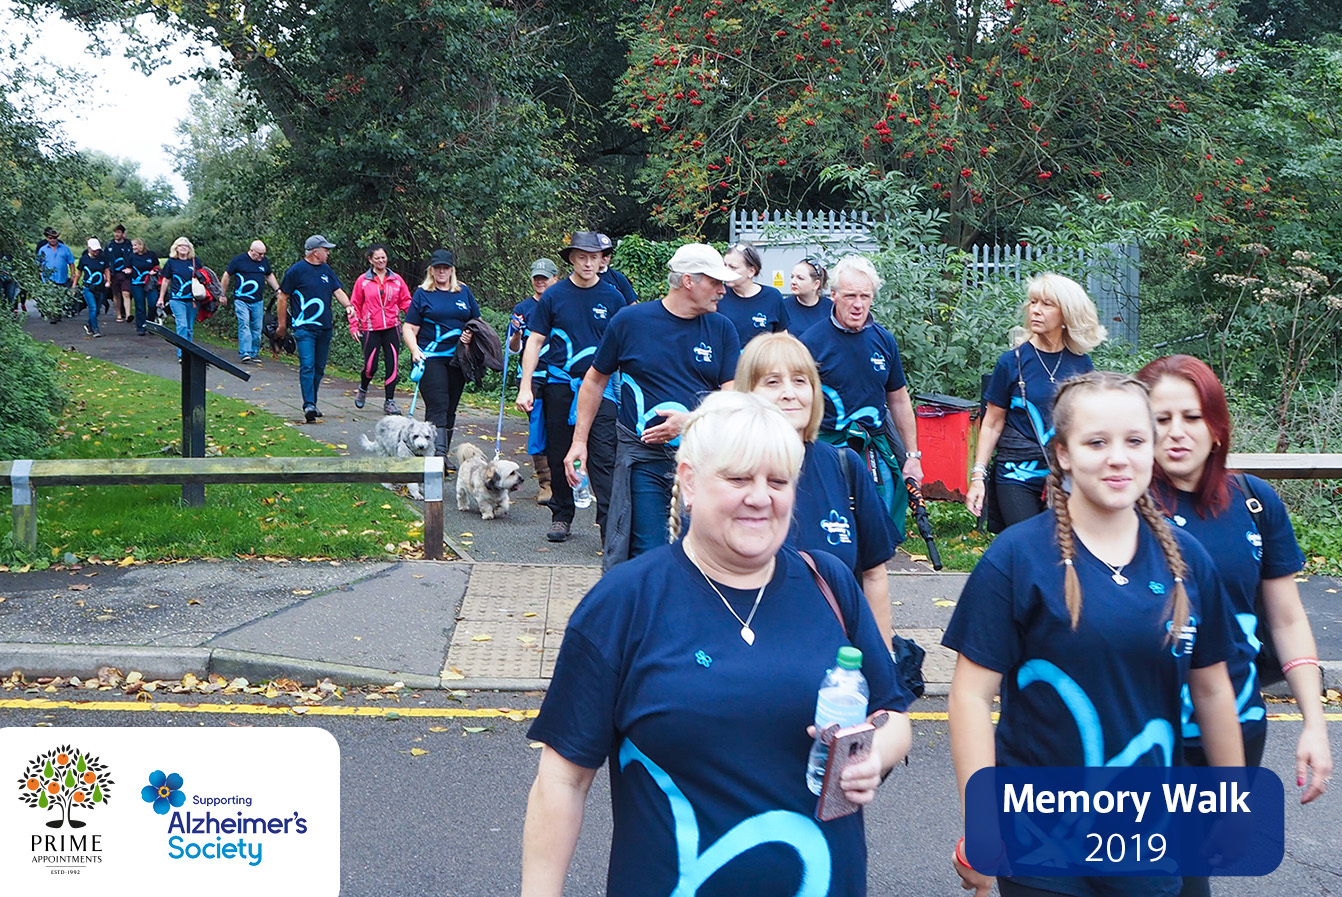 Prime Appointments Alzheimer's Memory Walk 2019, group of people walking in blue Alzheimer's t-shirts